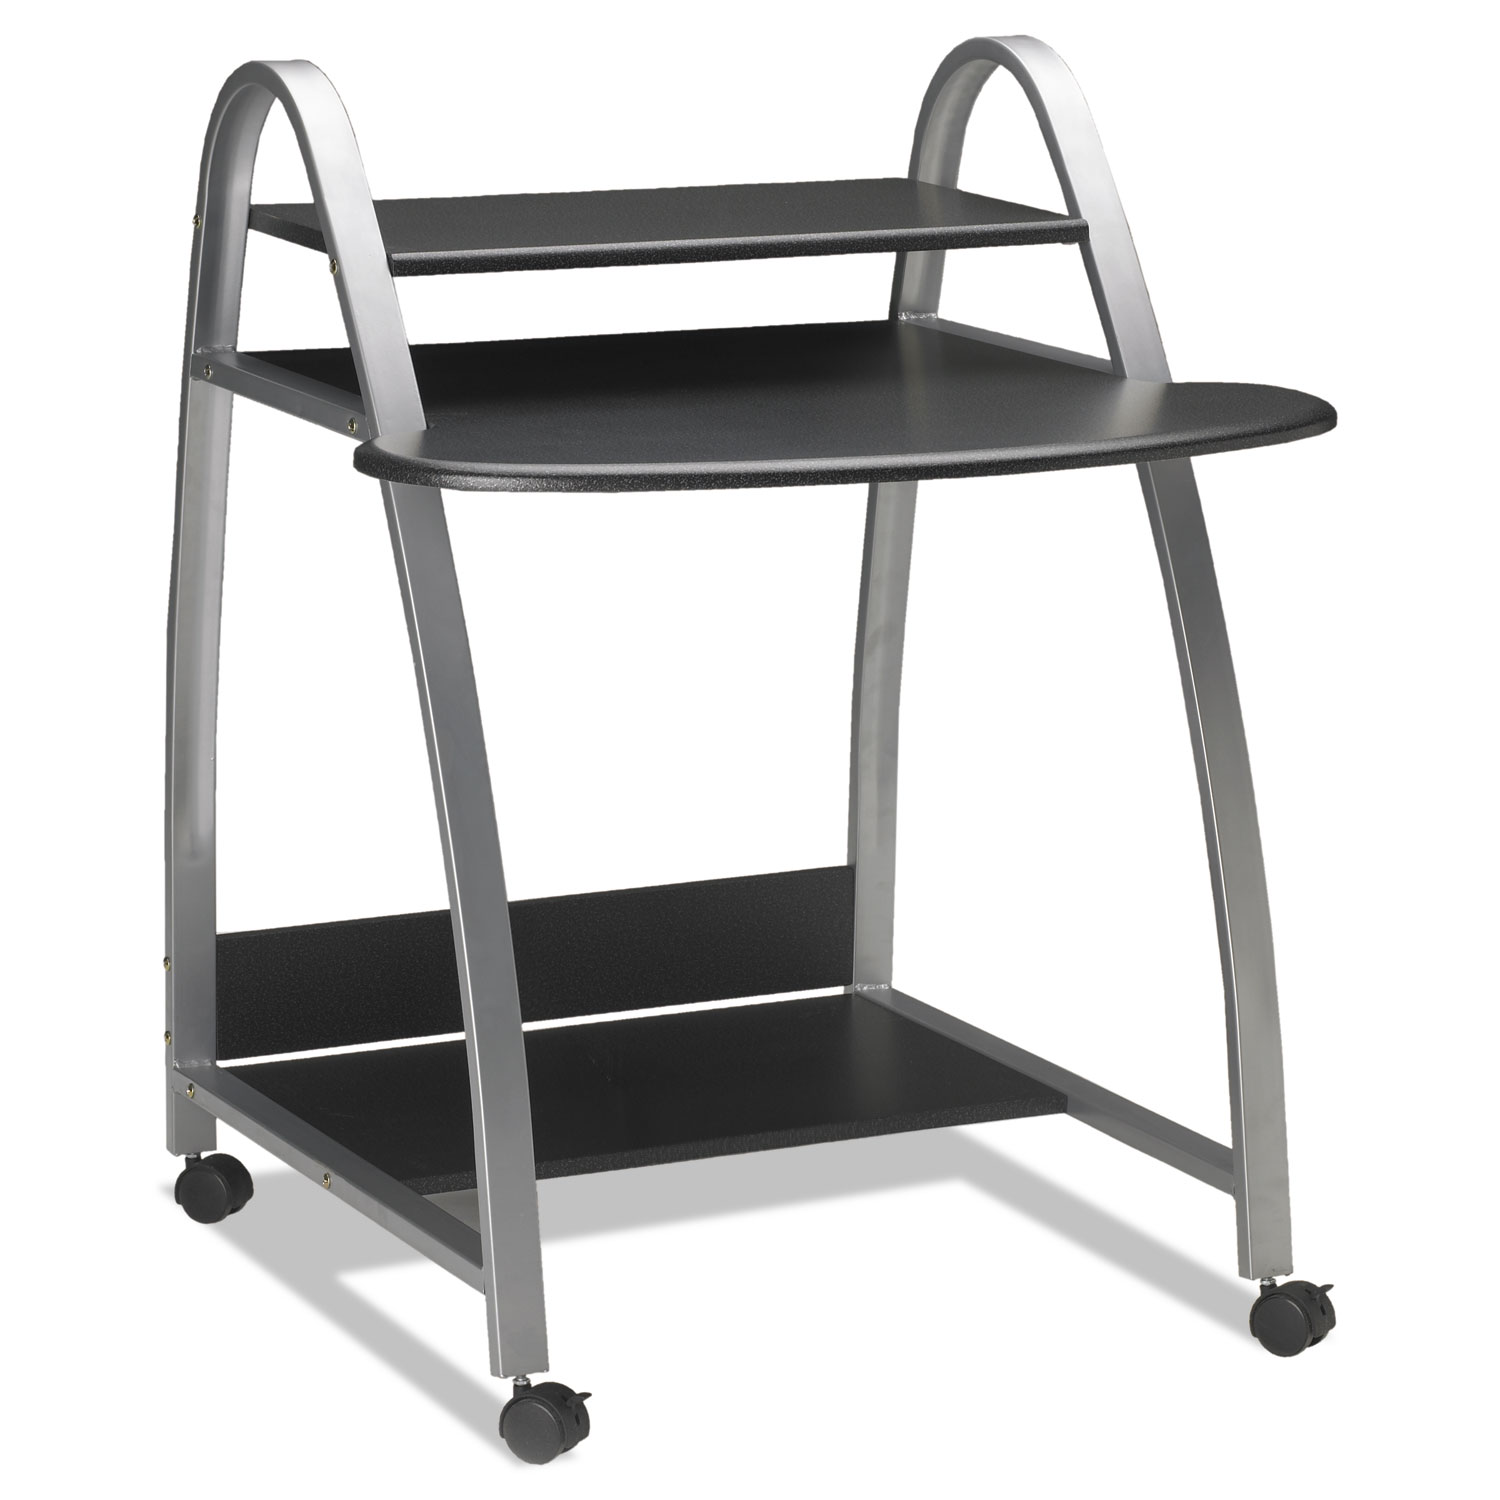 Eastwinds Arch Computer Cart, 31-1/2w x 34-1/2d x 37h, Anthracite